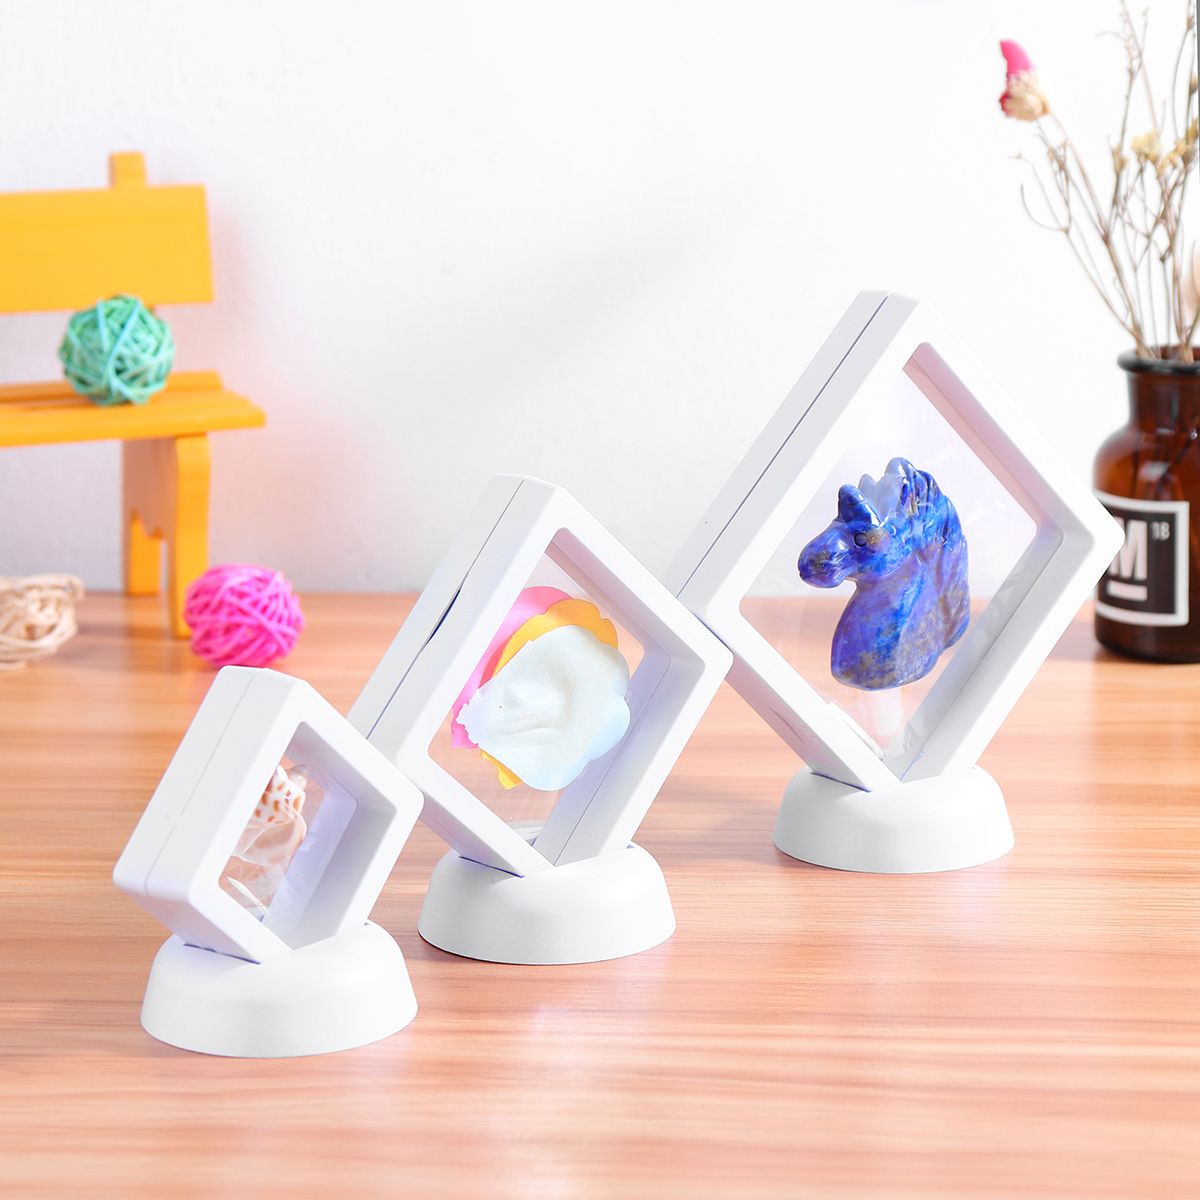 Square-3D-Album-Floating-Frame-Holder-Coin-Box-Jewelry-Box-Display-Showcase-with-Stand-1442341